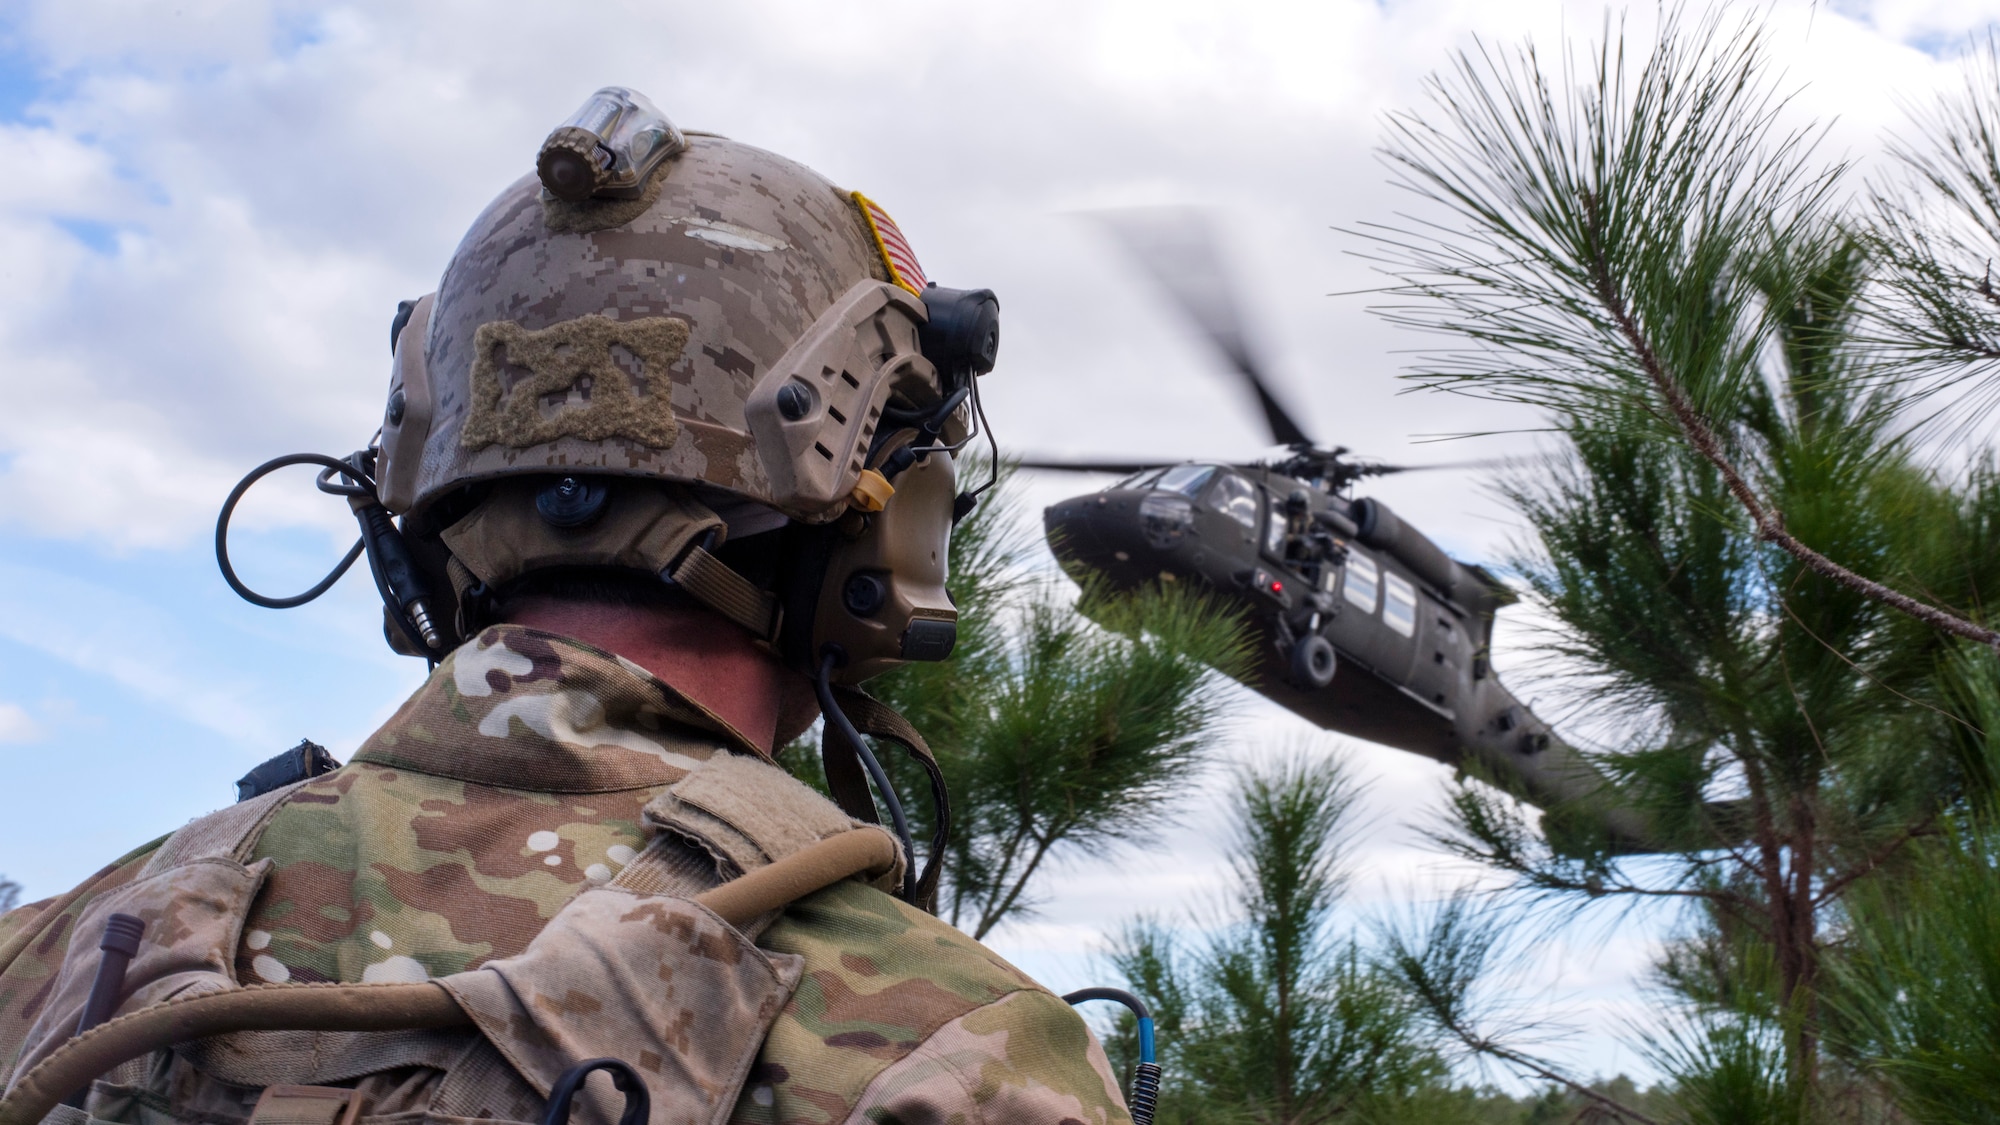 A U.S. Navy Sea, Air and Land (SEAL) team member awaits extraction from a UH-60 Black Hawk helicopter during an Emerald Warrior 2019 search and rescue training exercise, Jan. 22, 2019.